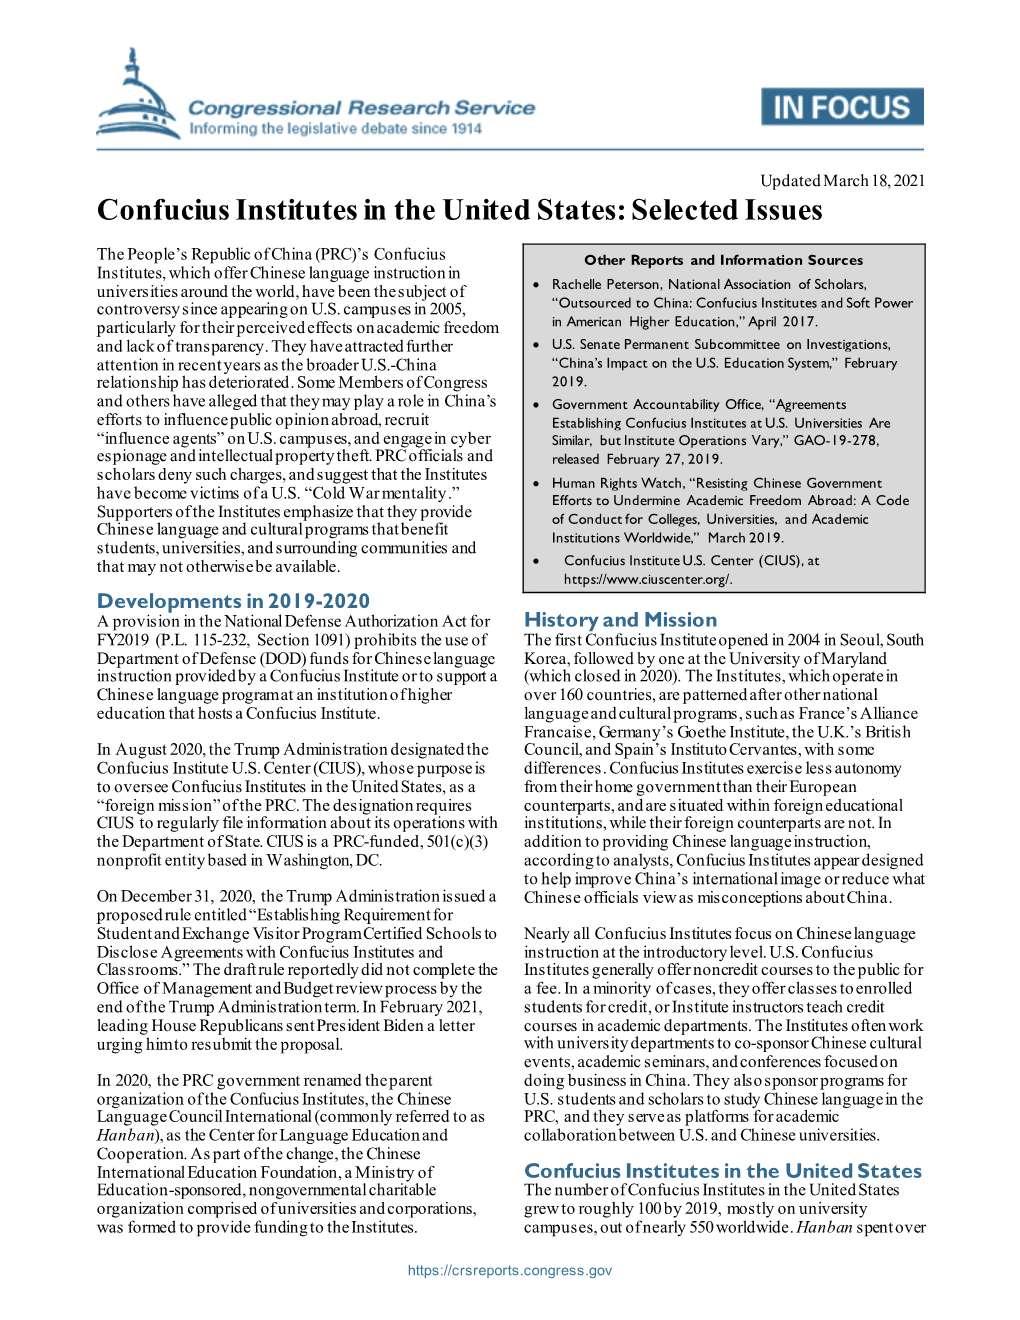 Confucius Institutes in the United States: Selected Issues